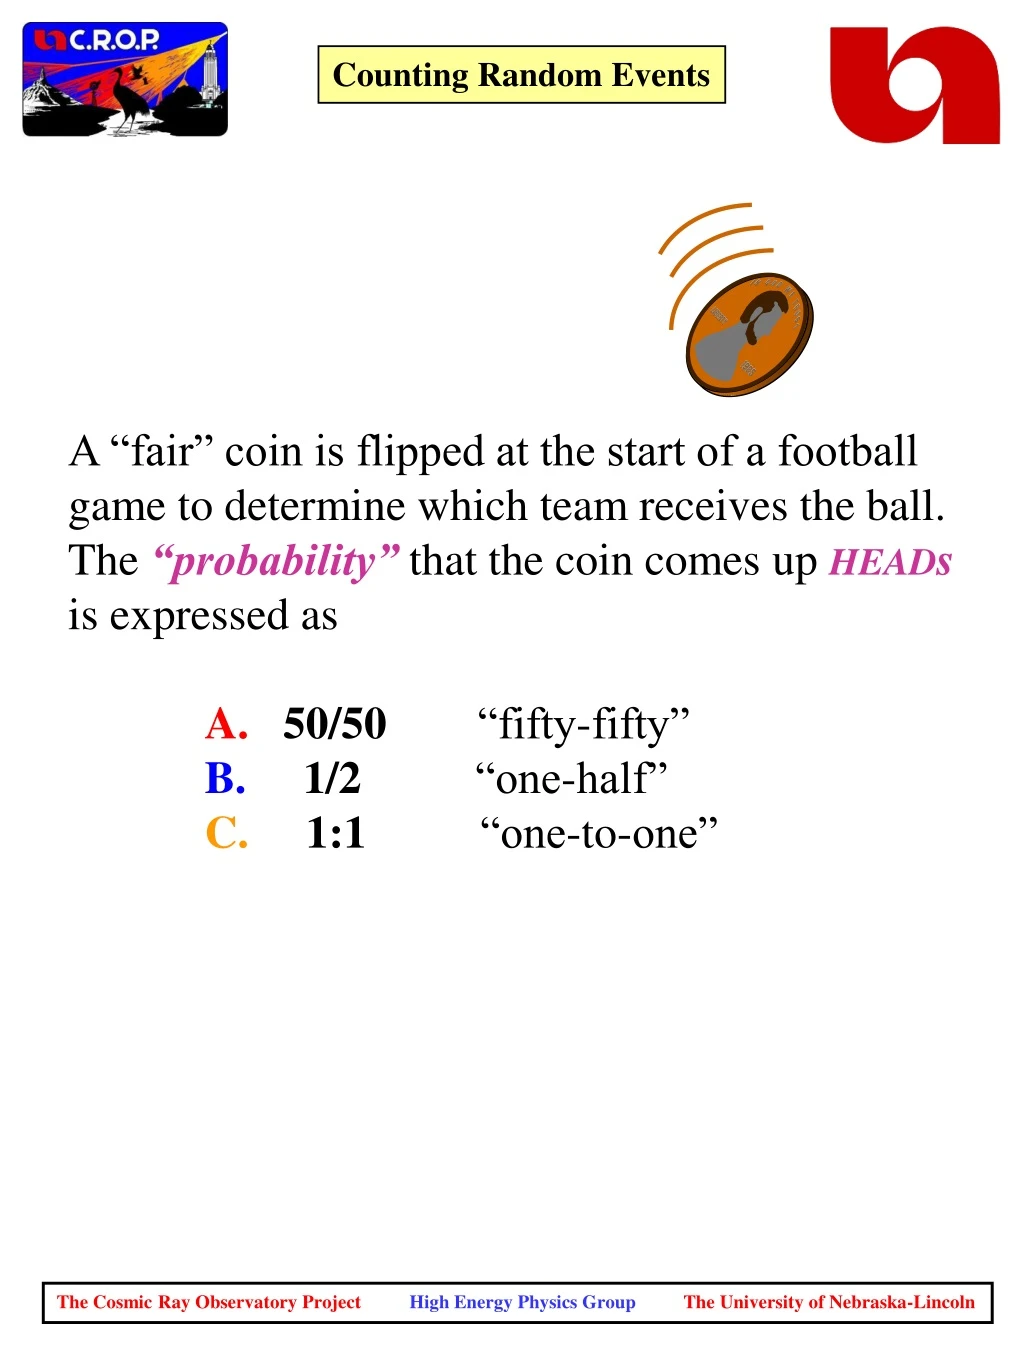 a fair coin is flipped at the start of a football